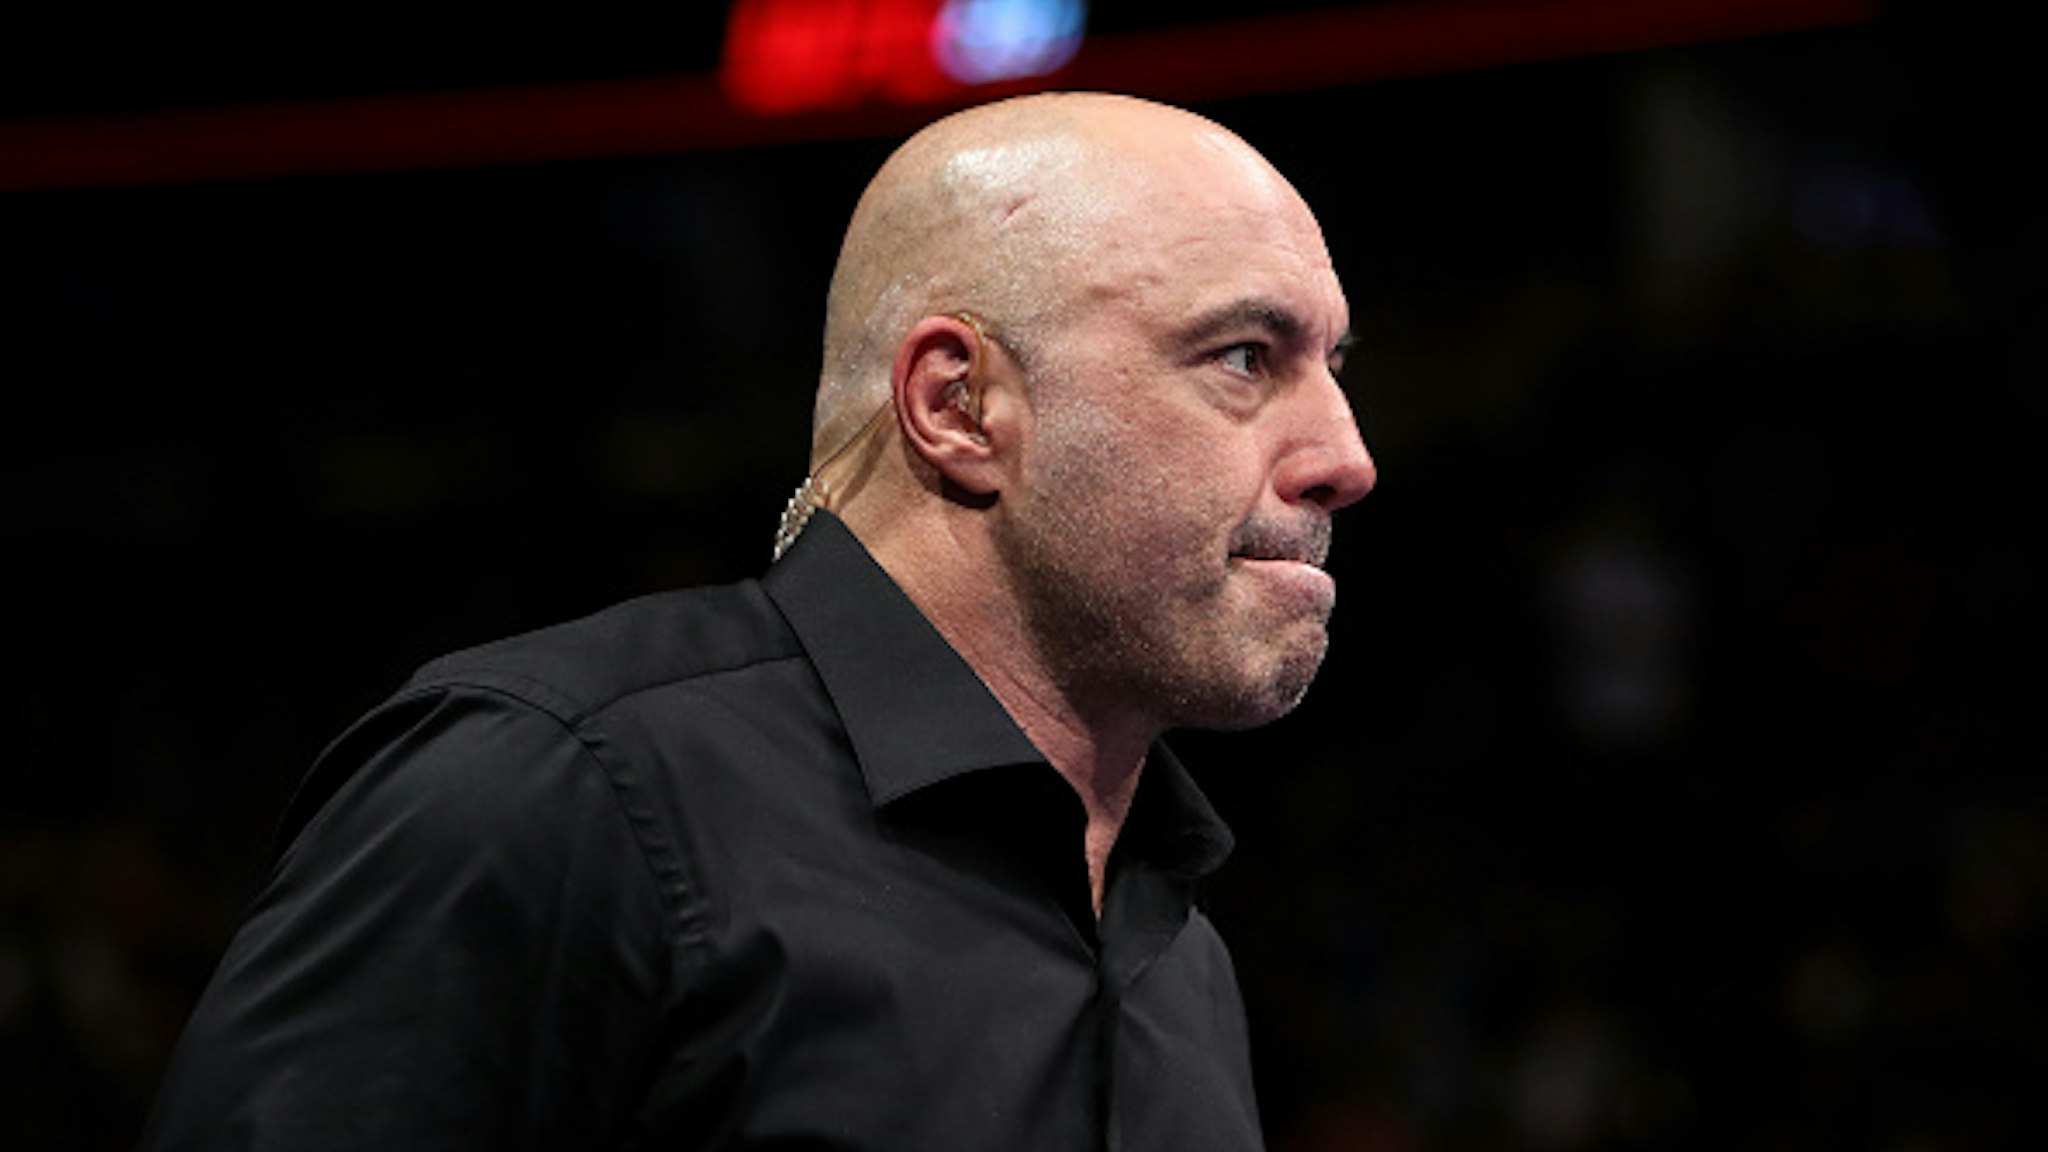 CHICAGO, IL - JUNE 09: Joe Rogan enters the octagon during the UFC 225: Whittaker v Romero 2 event at the United Center on June 9, 2018 in Chicago, Illinois.